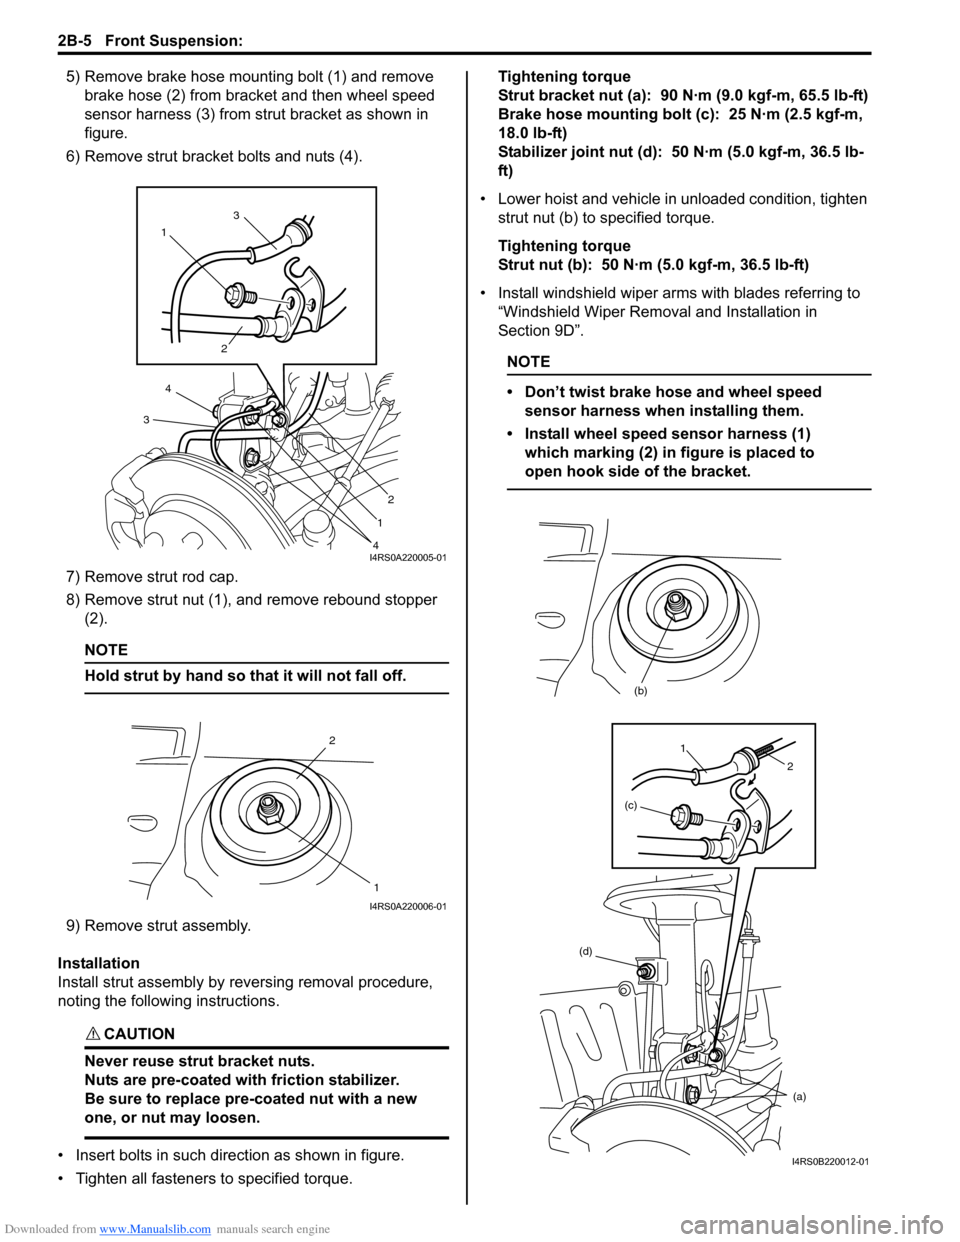 SUZUKI SWIFT 2008 2.G Service Workshop Manual Downloaded from www.Manualslib.com manuals search engine 2B-5 Front Suspension: 
5) Remove brake hose mounting bolt (1) and remove brake hose (2) from bracket and then wheel speed 
sensor harness (3) 